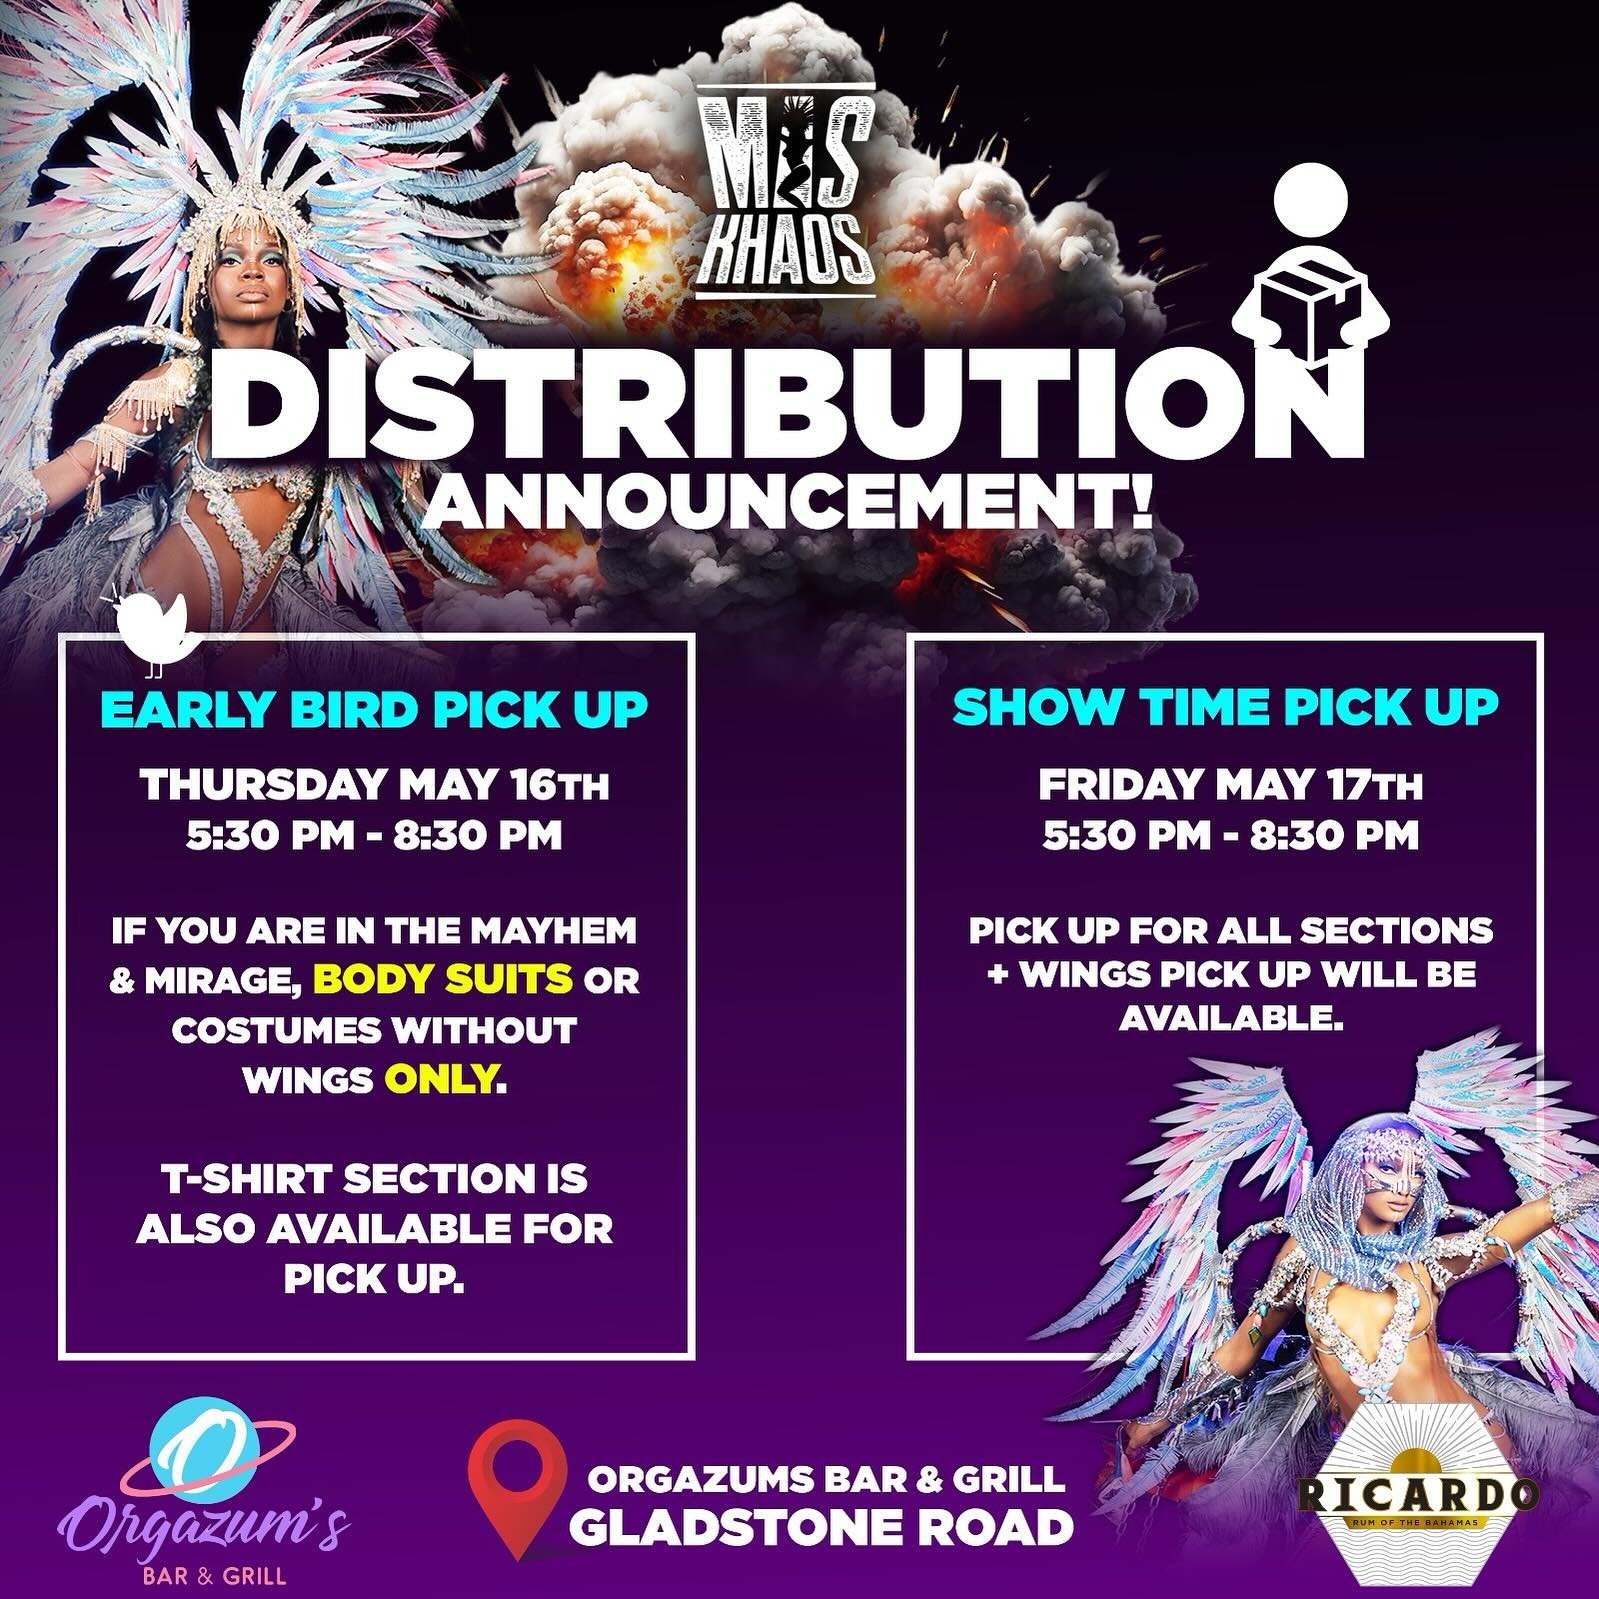 *Mas Khaos 2024 Distribution Announcement!*

Early Bird Pickup:
Thursday, May 16th, 5:30pm&mdash;8:30 pm. If you are in the Mayhem or Mirage Sections, pickup will be available for BODY SUITS ONLY. The T-shirt section will also be available for pickup